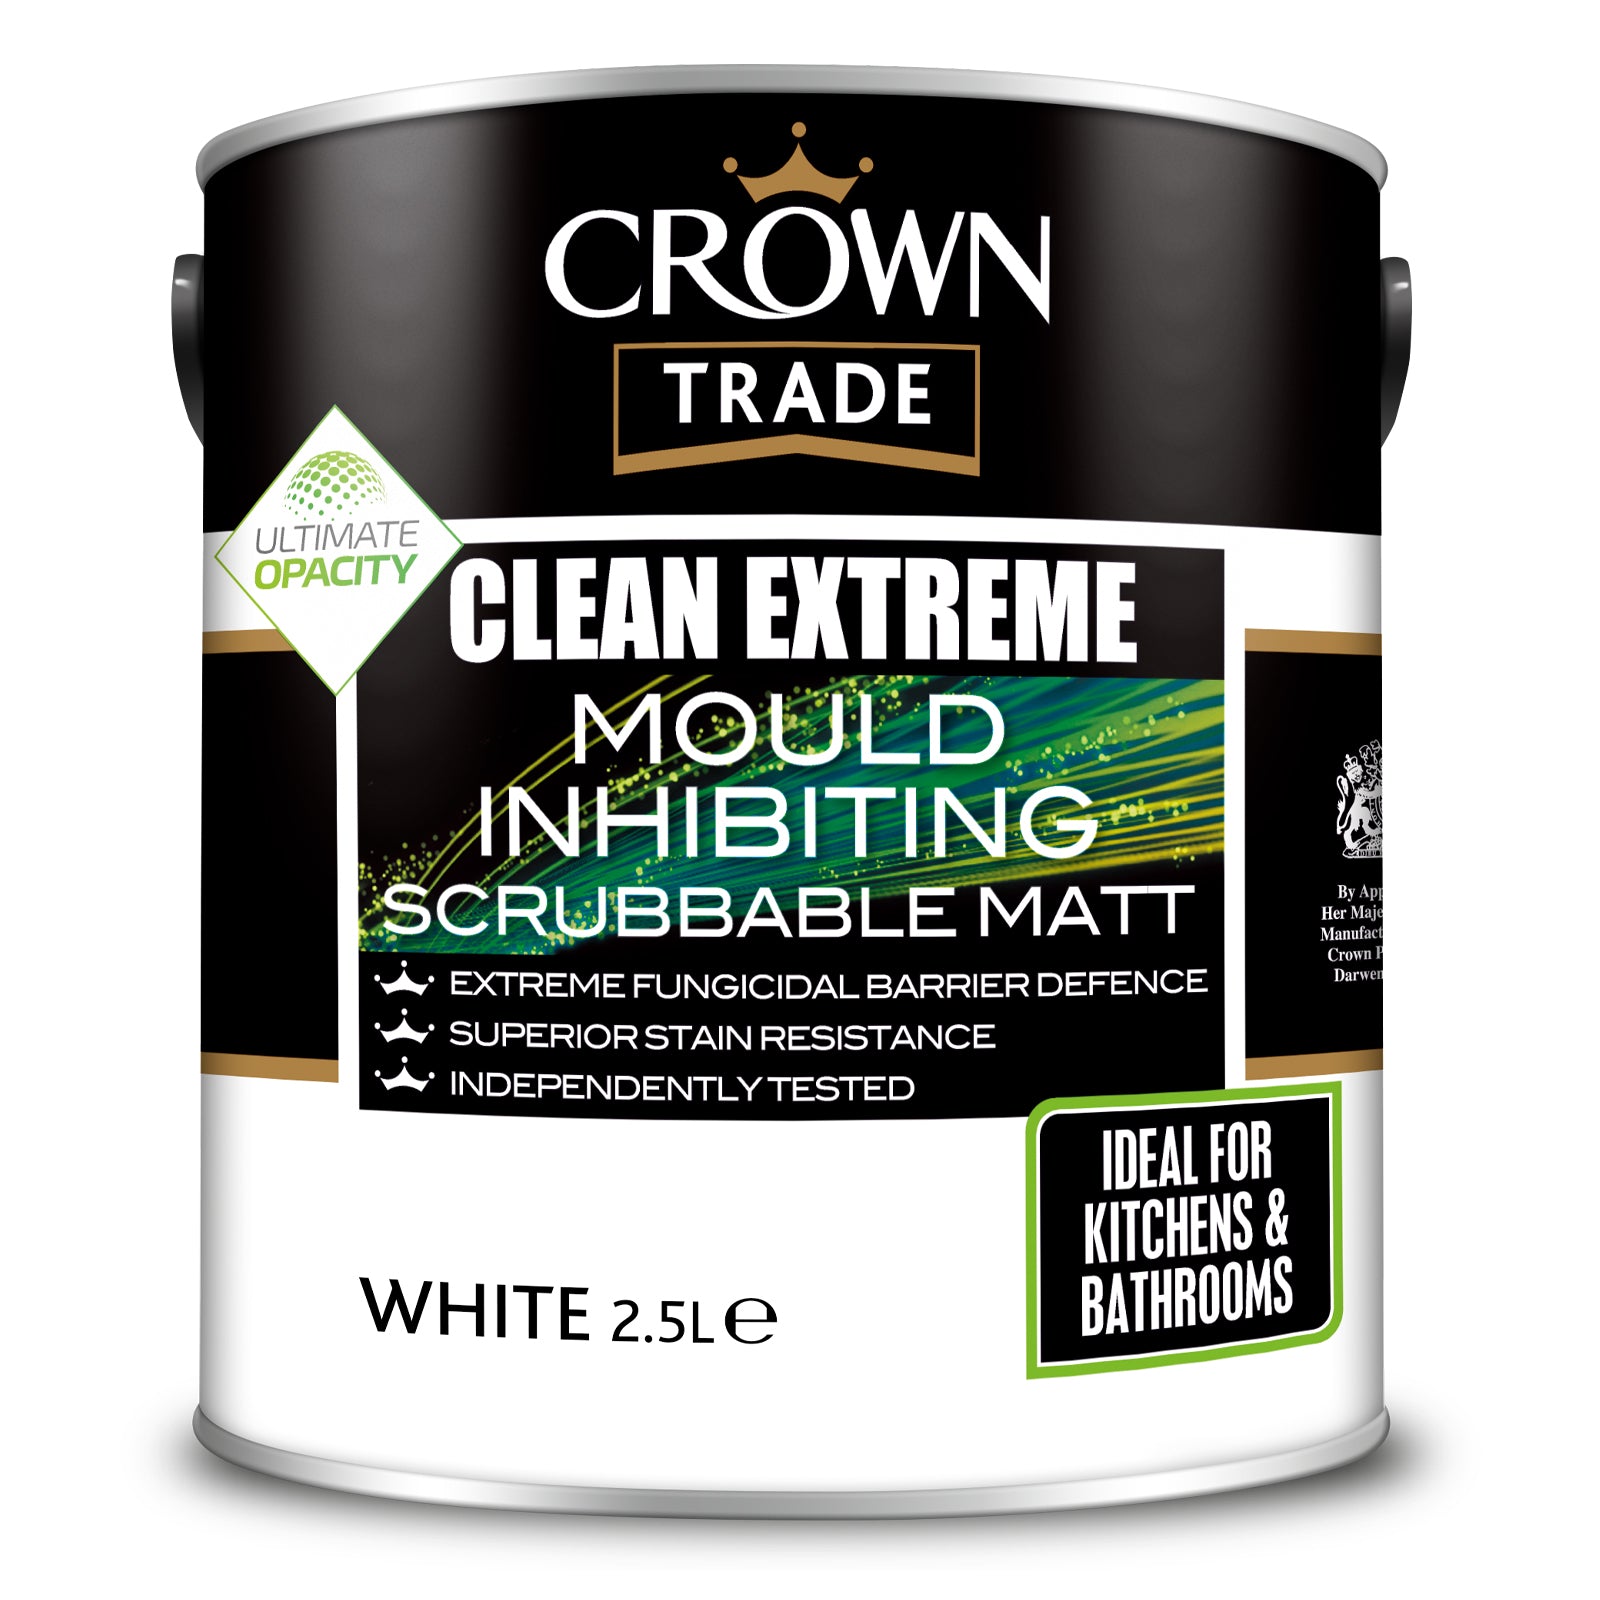 Crown Trade Clean Extreme Mould Inhibiting Scrubbable Matt 2.5L